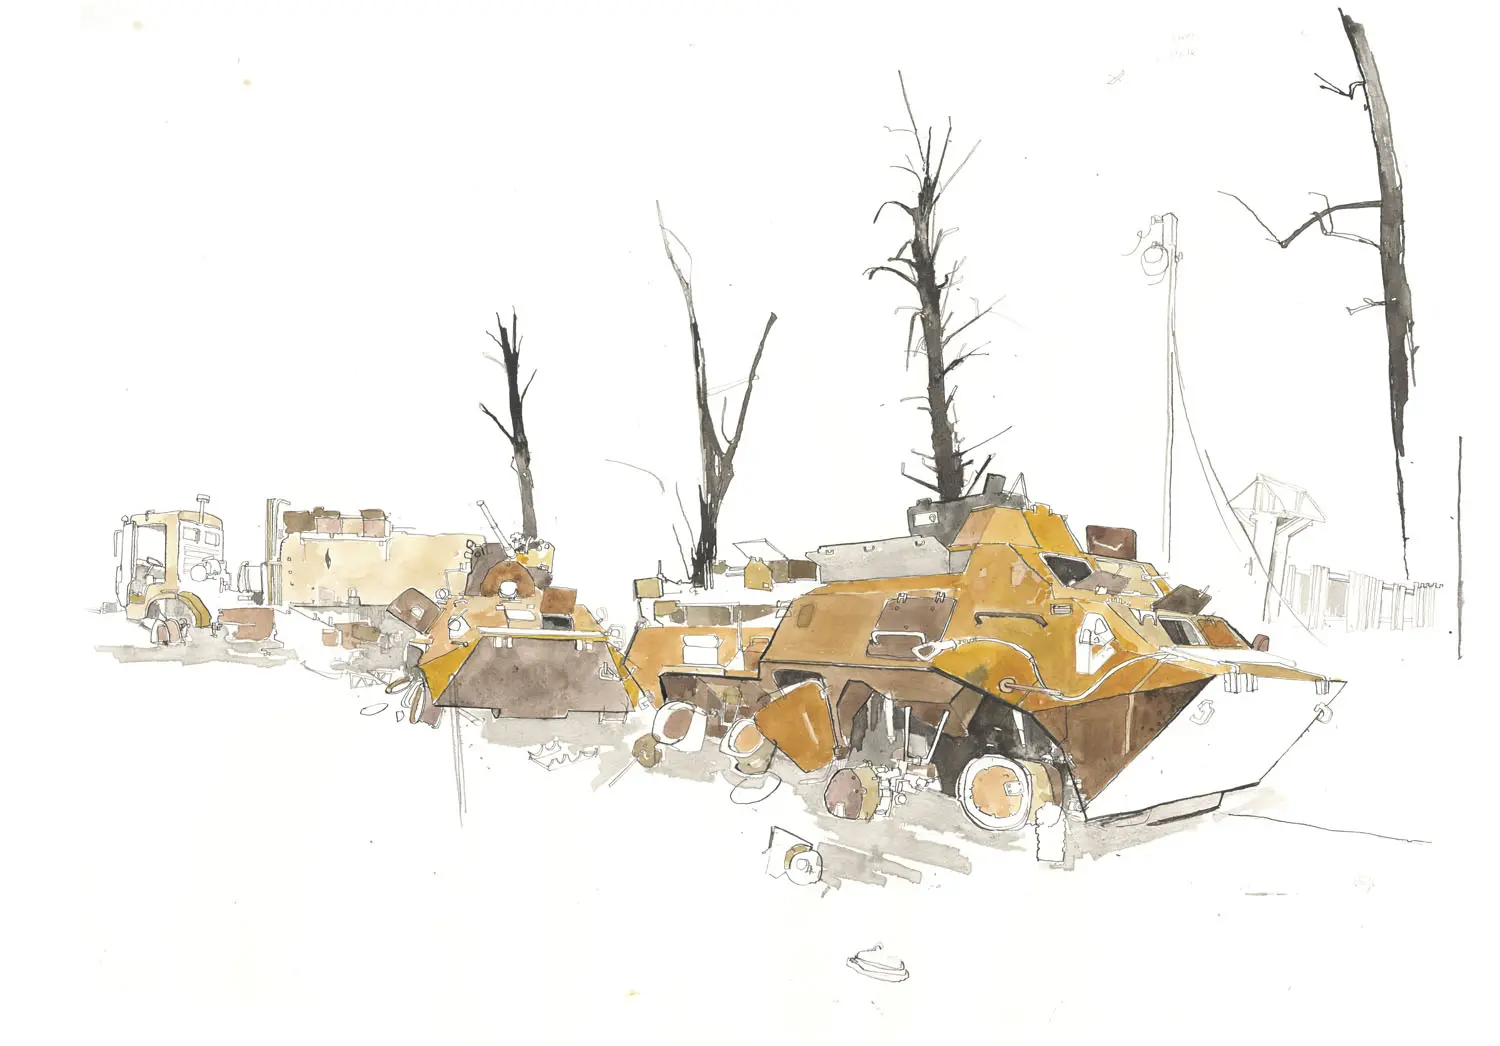 Illustration of two tanks and a large truck. The tank wheels are broken and there are bare trees on the edge of the road.